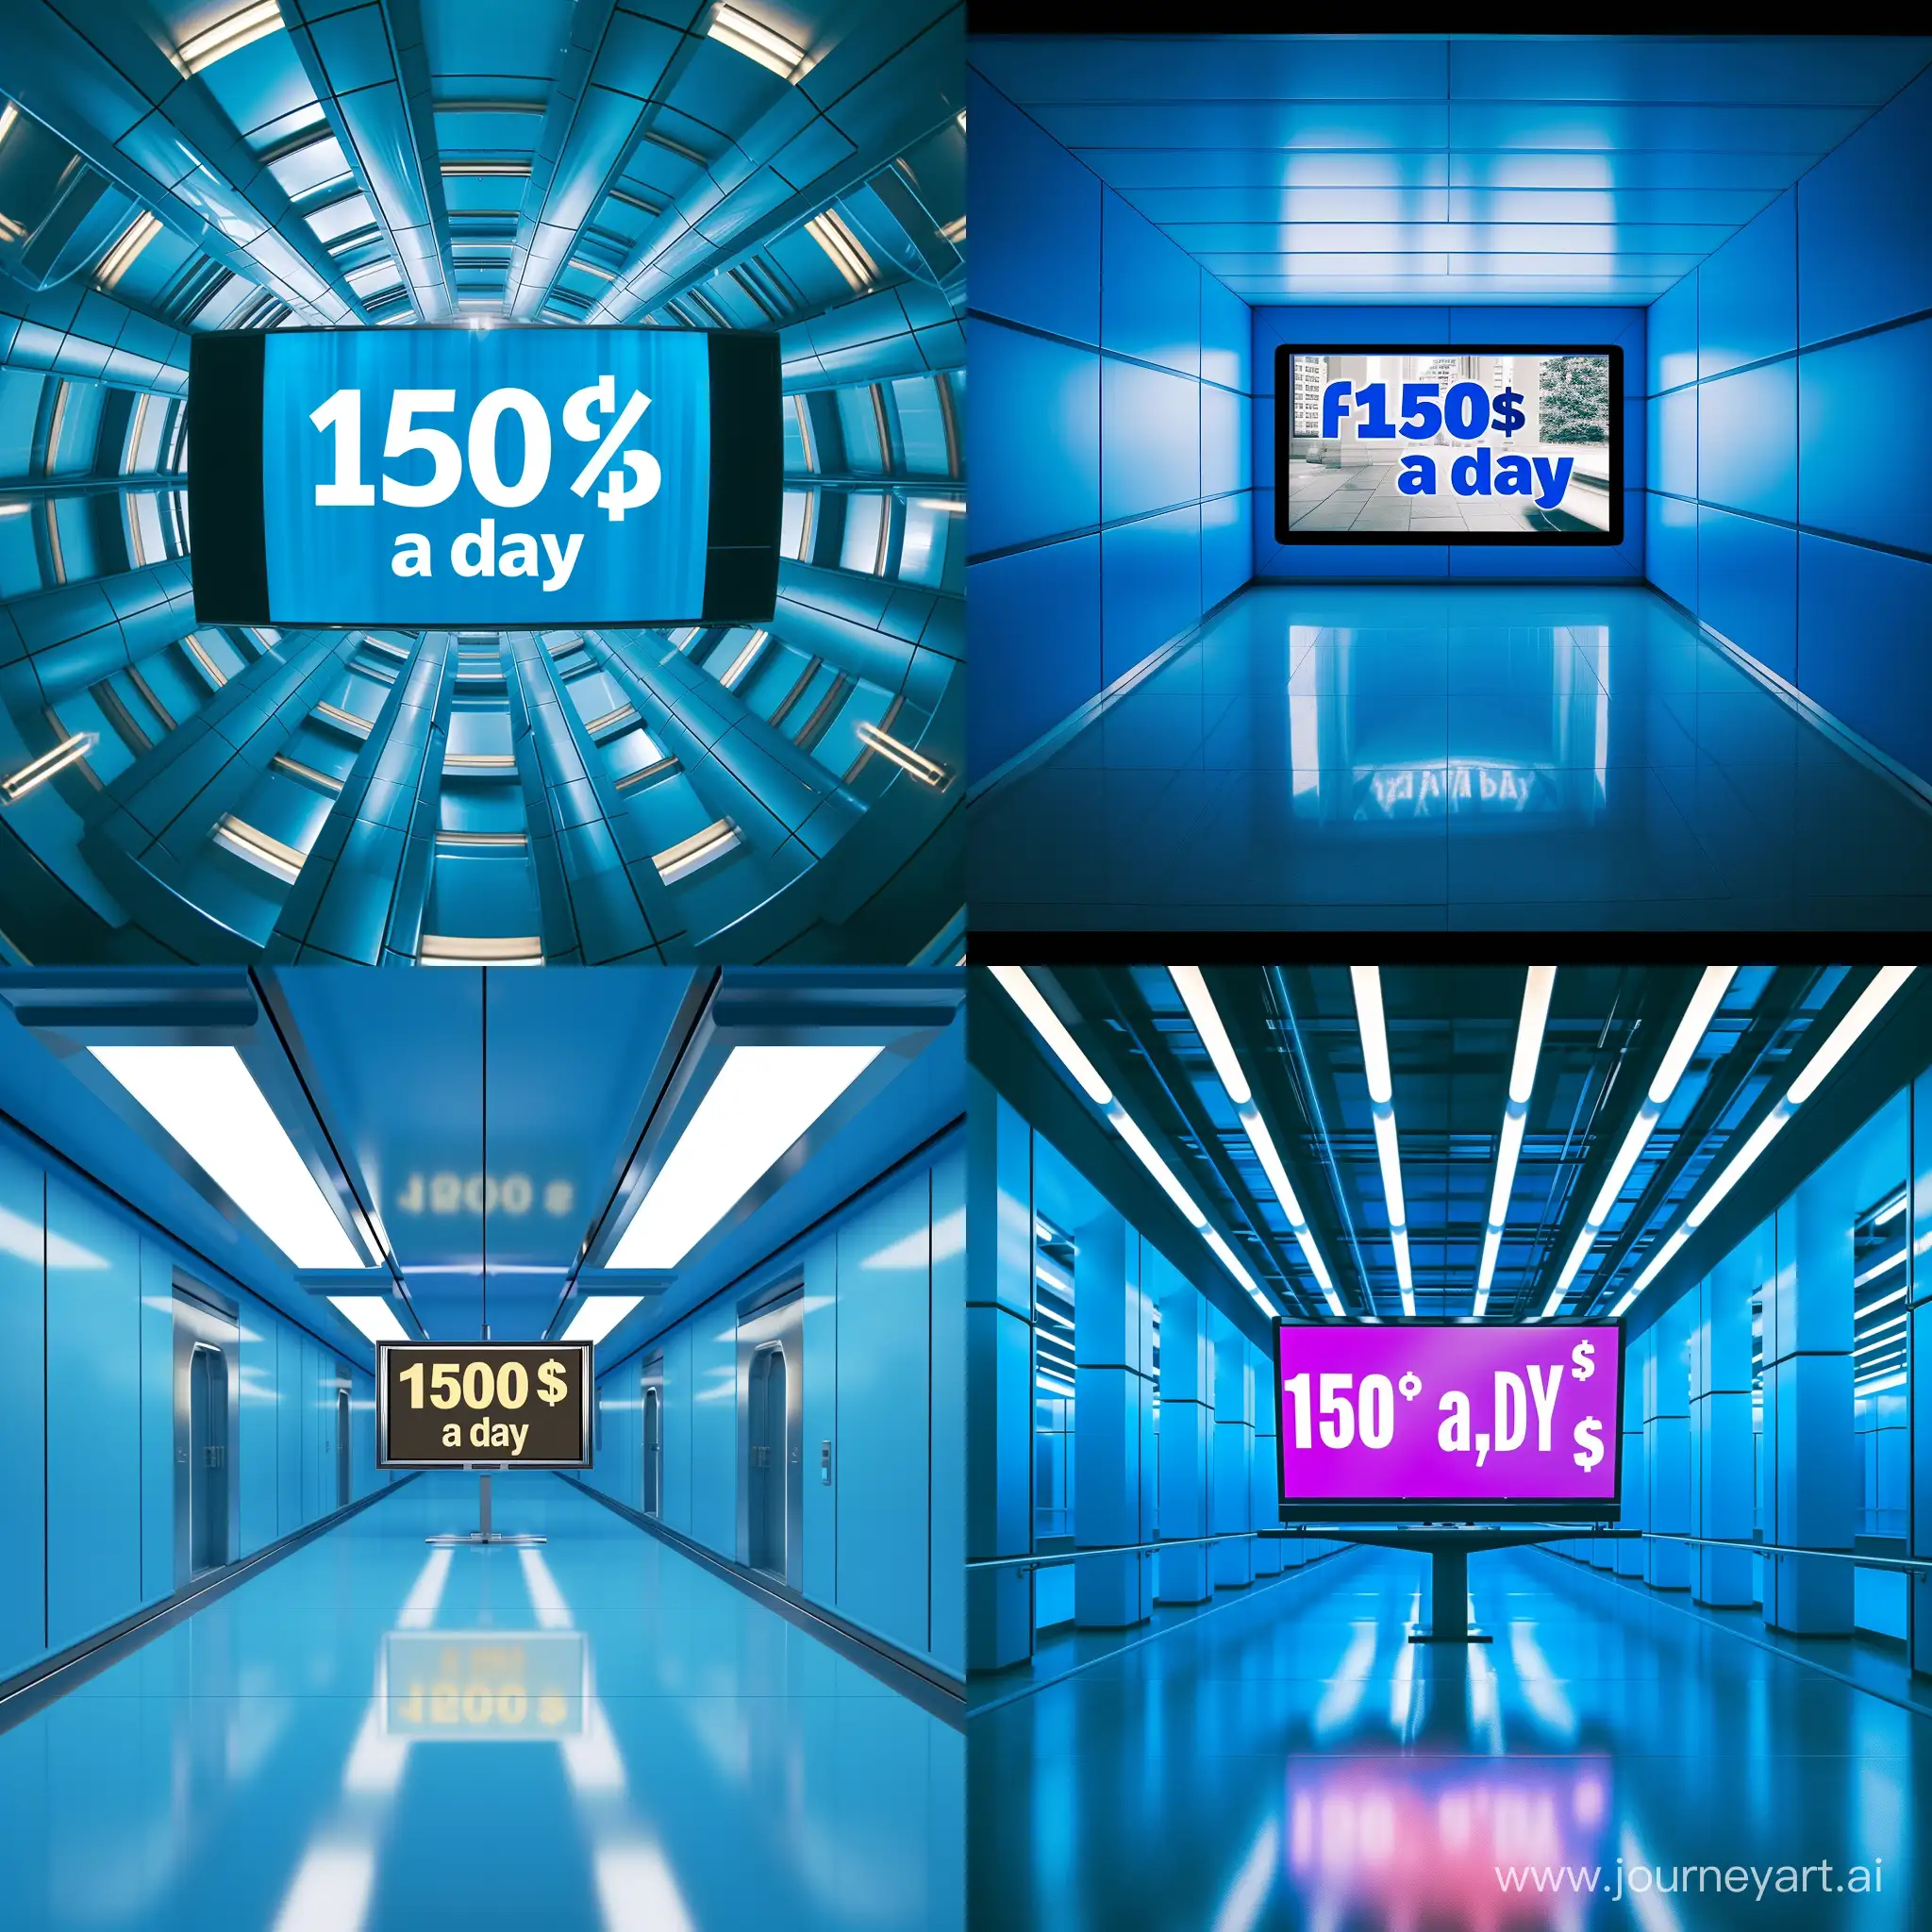 TV in the center of a large blue room, on the screen there is a bright text «150$ a day»